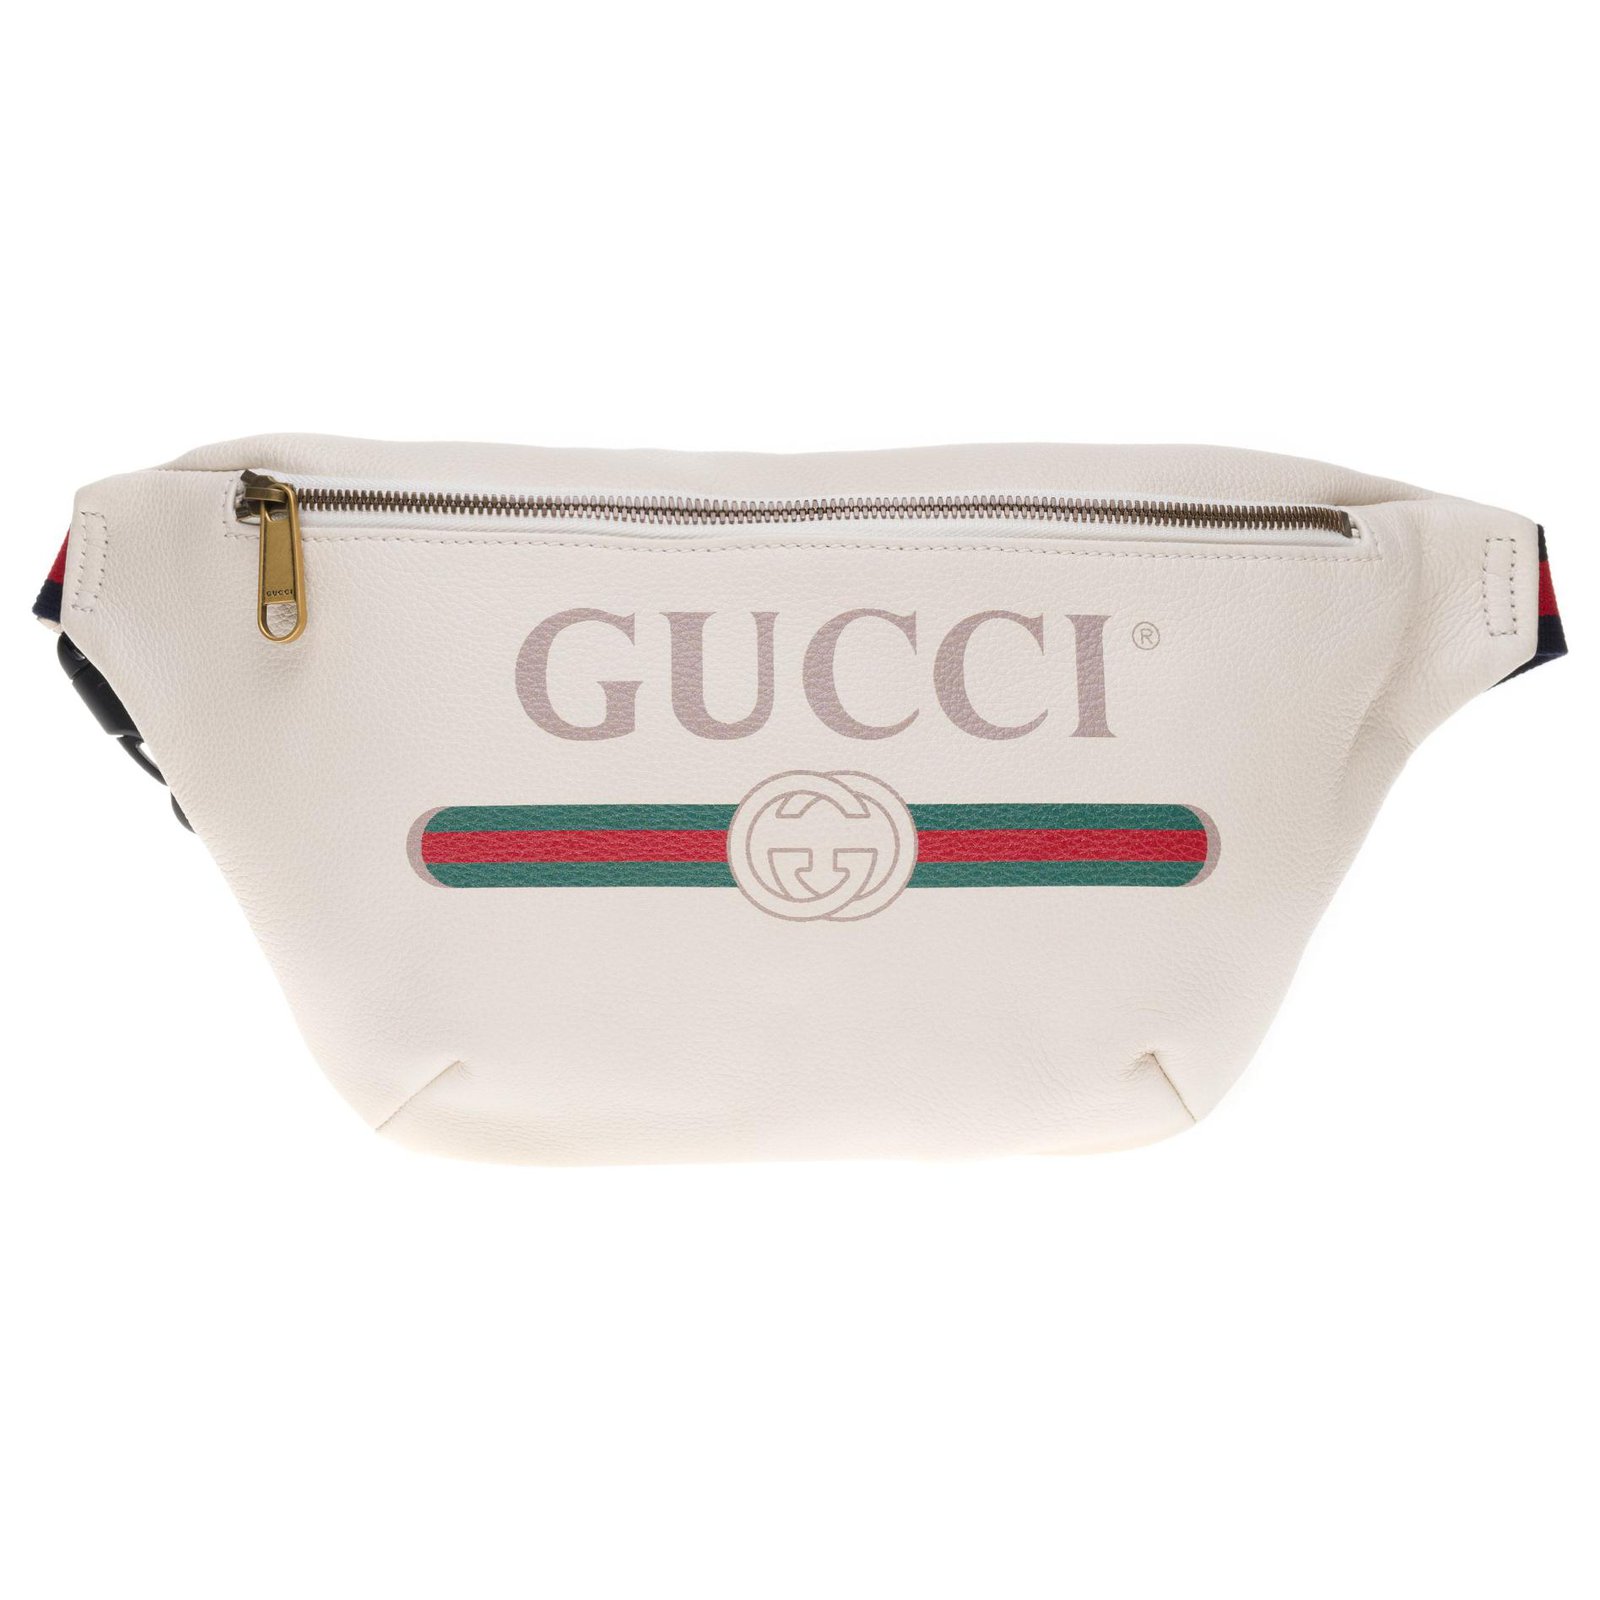 Banana Unisex Gucci White leather belt bag with vintage Gucci logo, new ...